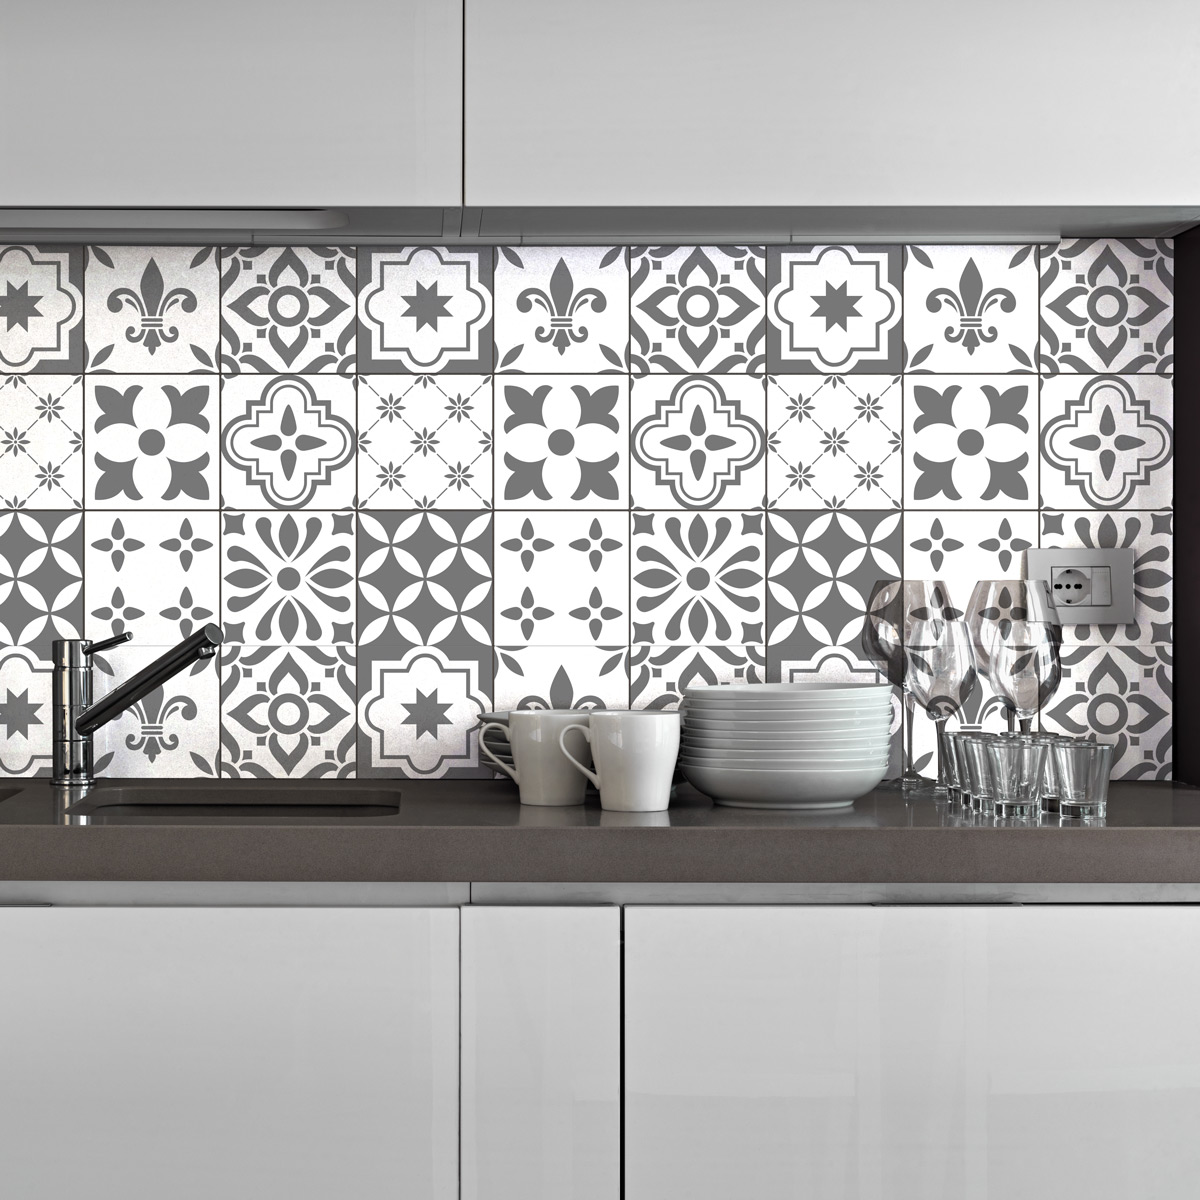 9 wall stickers cement tiles Sivas